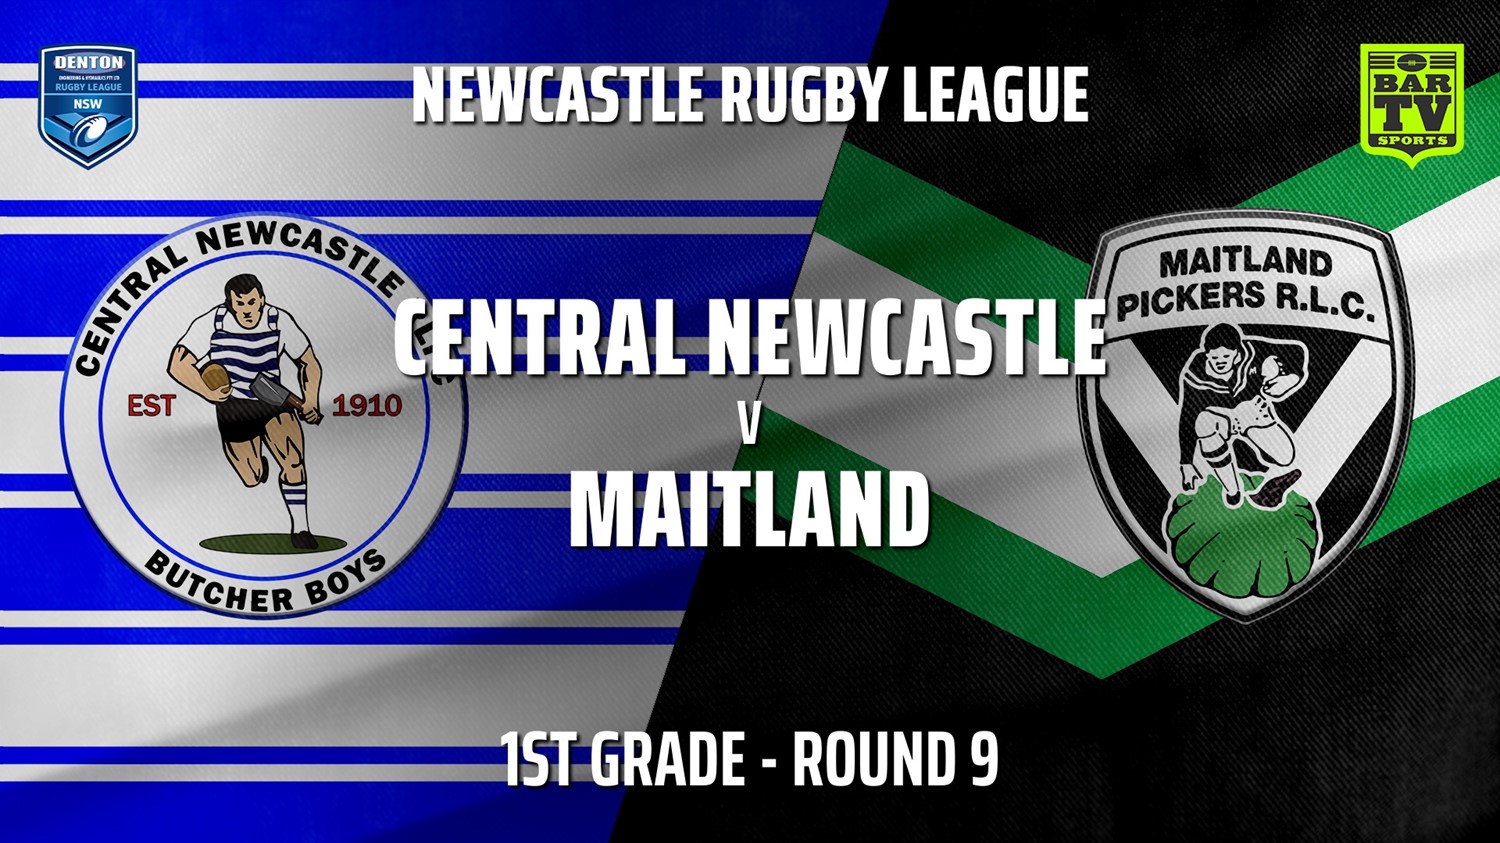 210530-Newcastle Rugby League Round 9 - 1st Grade - Central Newcastle v Maitland Pickers Slate Image